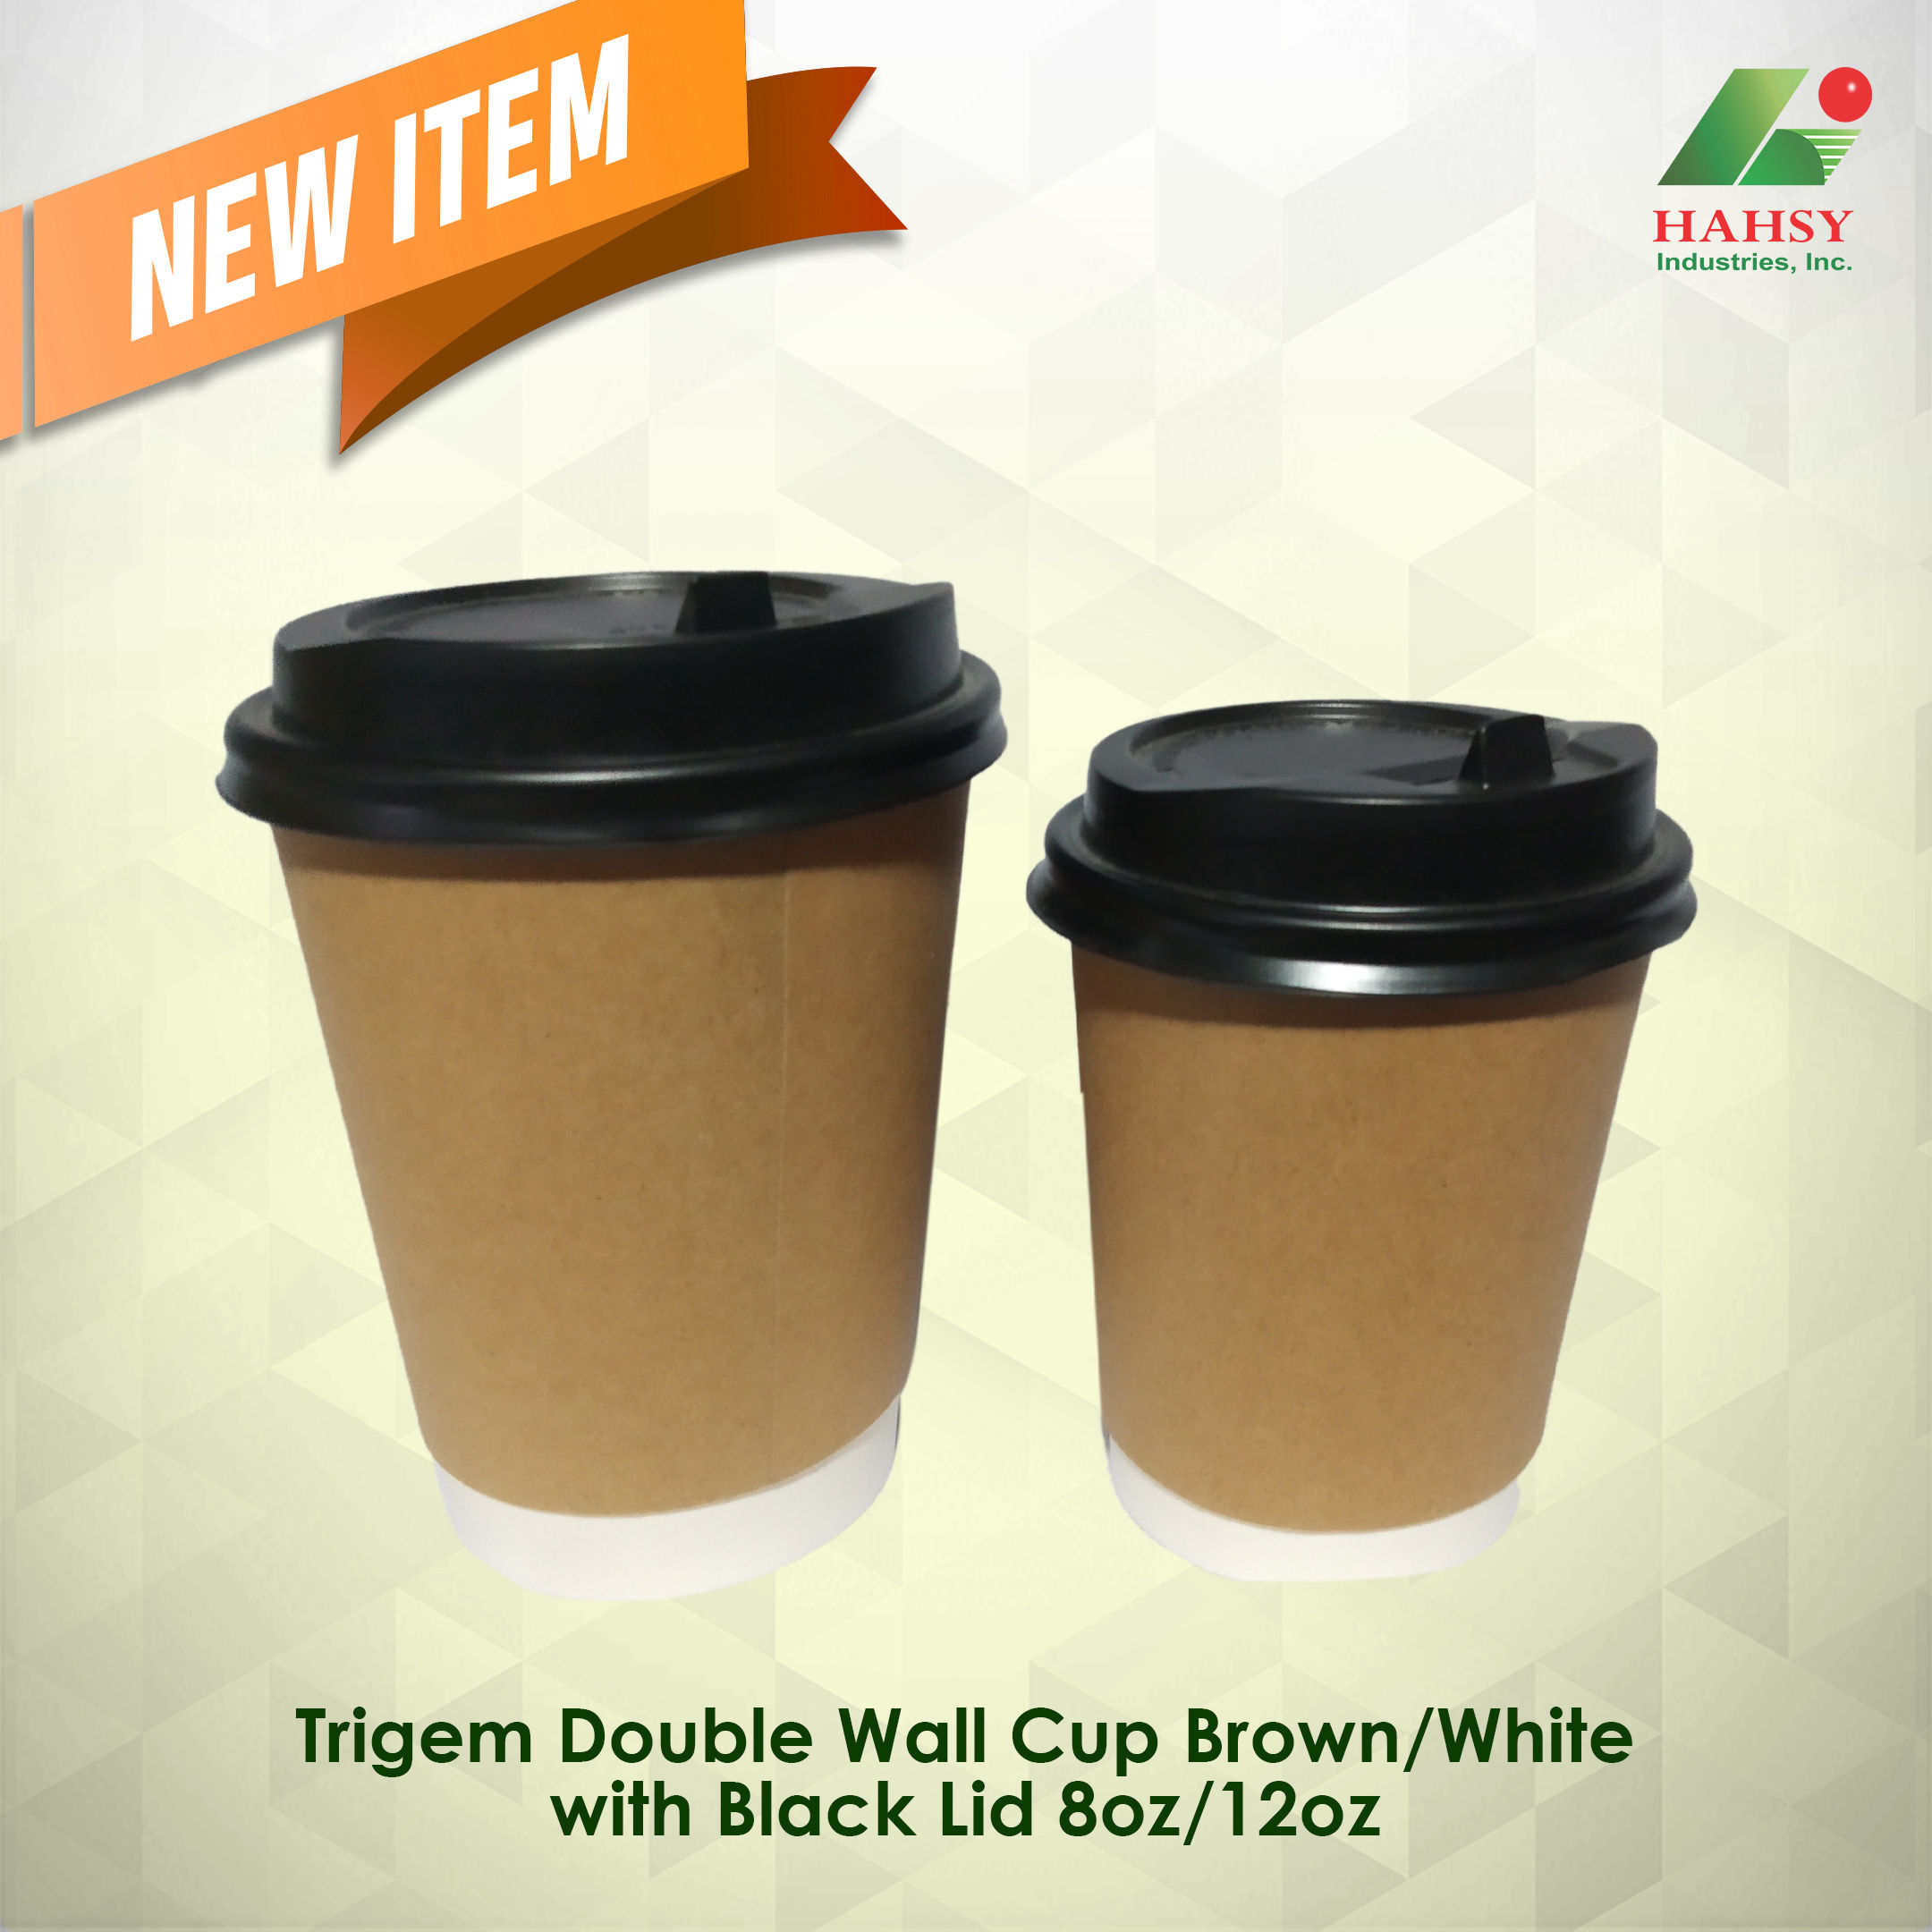 Trigem Double wall cup brown with black lid 8oz 12oz